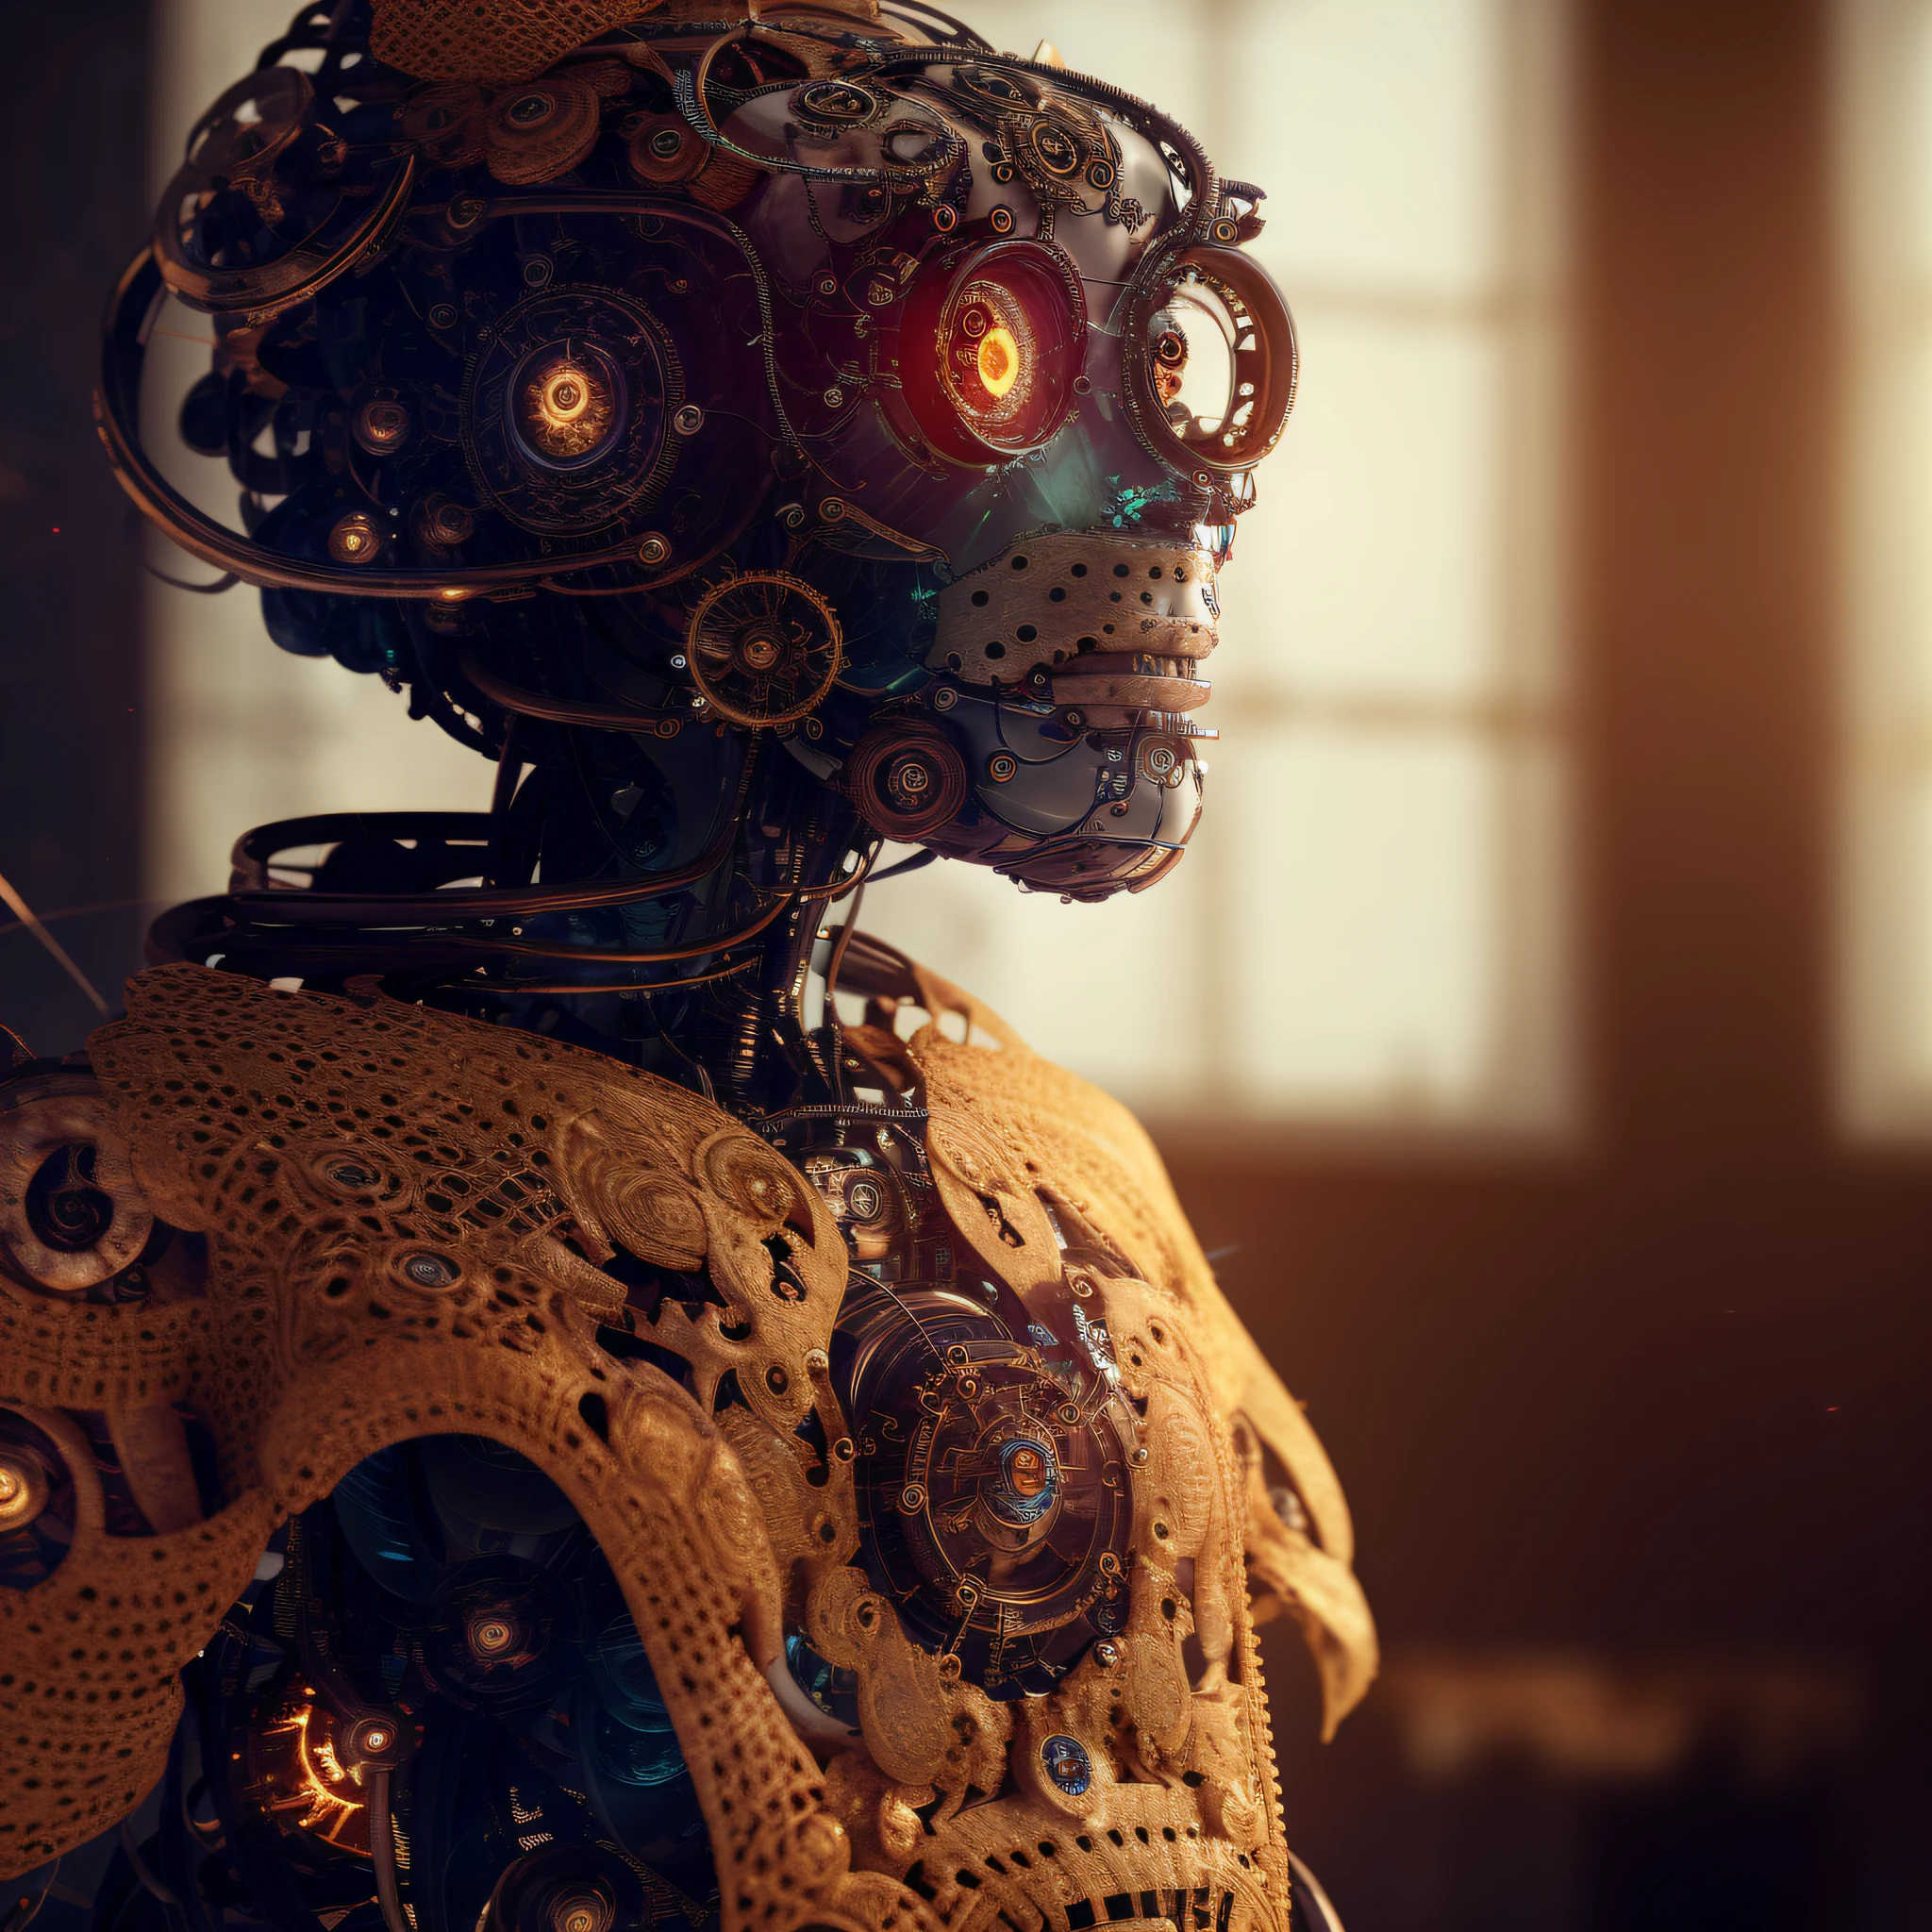 There is a robot with a big head and a big face dressed in a beige crochet blouse, cyber steampunk 8 k 3 d, intricate render 8K, steampunk automaton, steampunk robot, fashion cyberpunk mechanoid, detailed humanoid, render art nouveau octane, intricate art. octane render, cyber steampunk, beautiful octane render, intricate cyborg, steampunk digital art, 8k octane render fantasy style, steampunk aesthetic, fashion photography, fashion